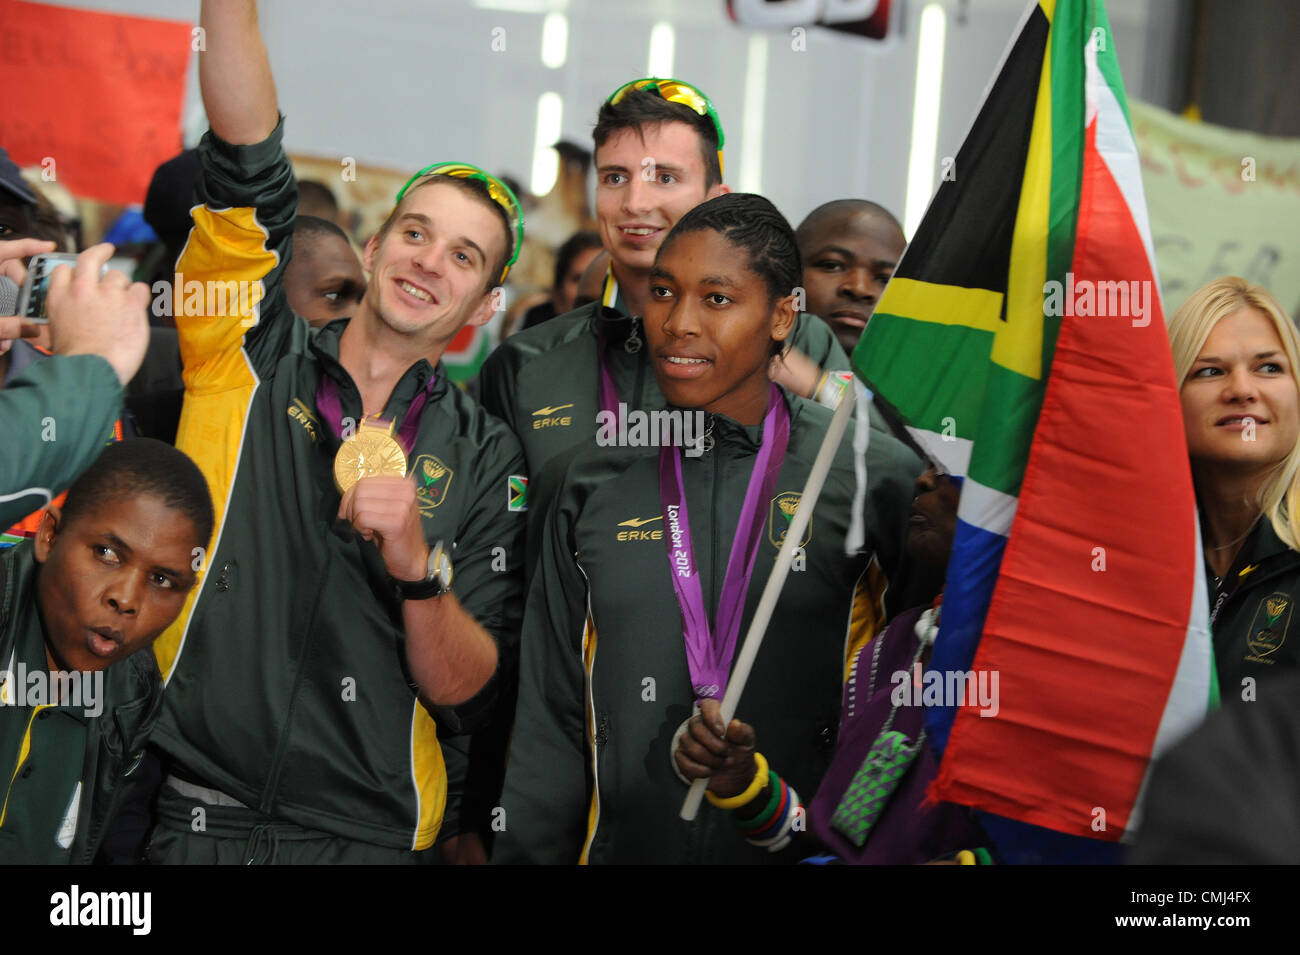 14th Aug 2012 Johannesburg, South Africa. Caster Semenya leads the medal winners during the South African Olympic team arrival and press conference at OR Tambo International Airport on August 14, 2012 in Johannesburg, South Africa Photo by Duif du Toit / Gallo Images Stock Photo